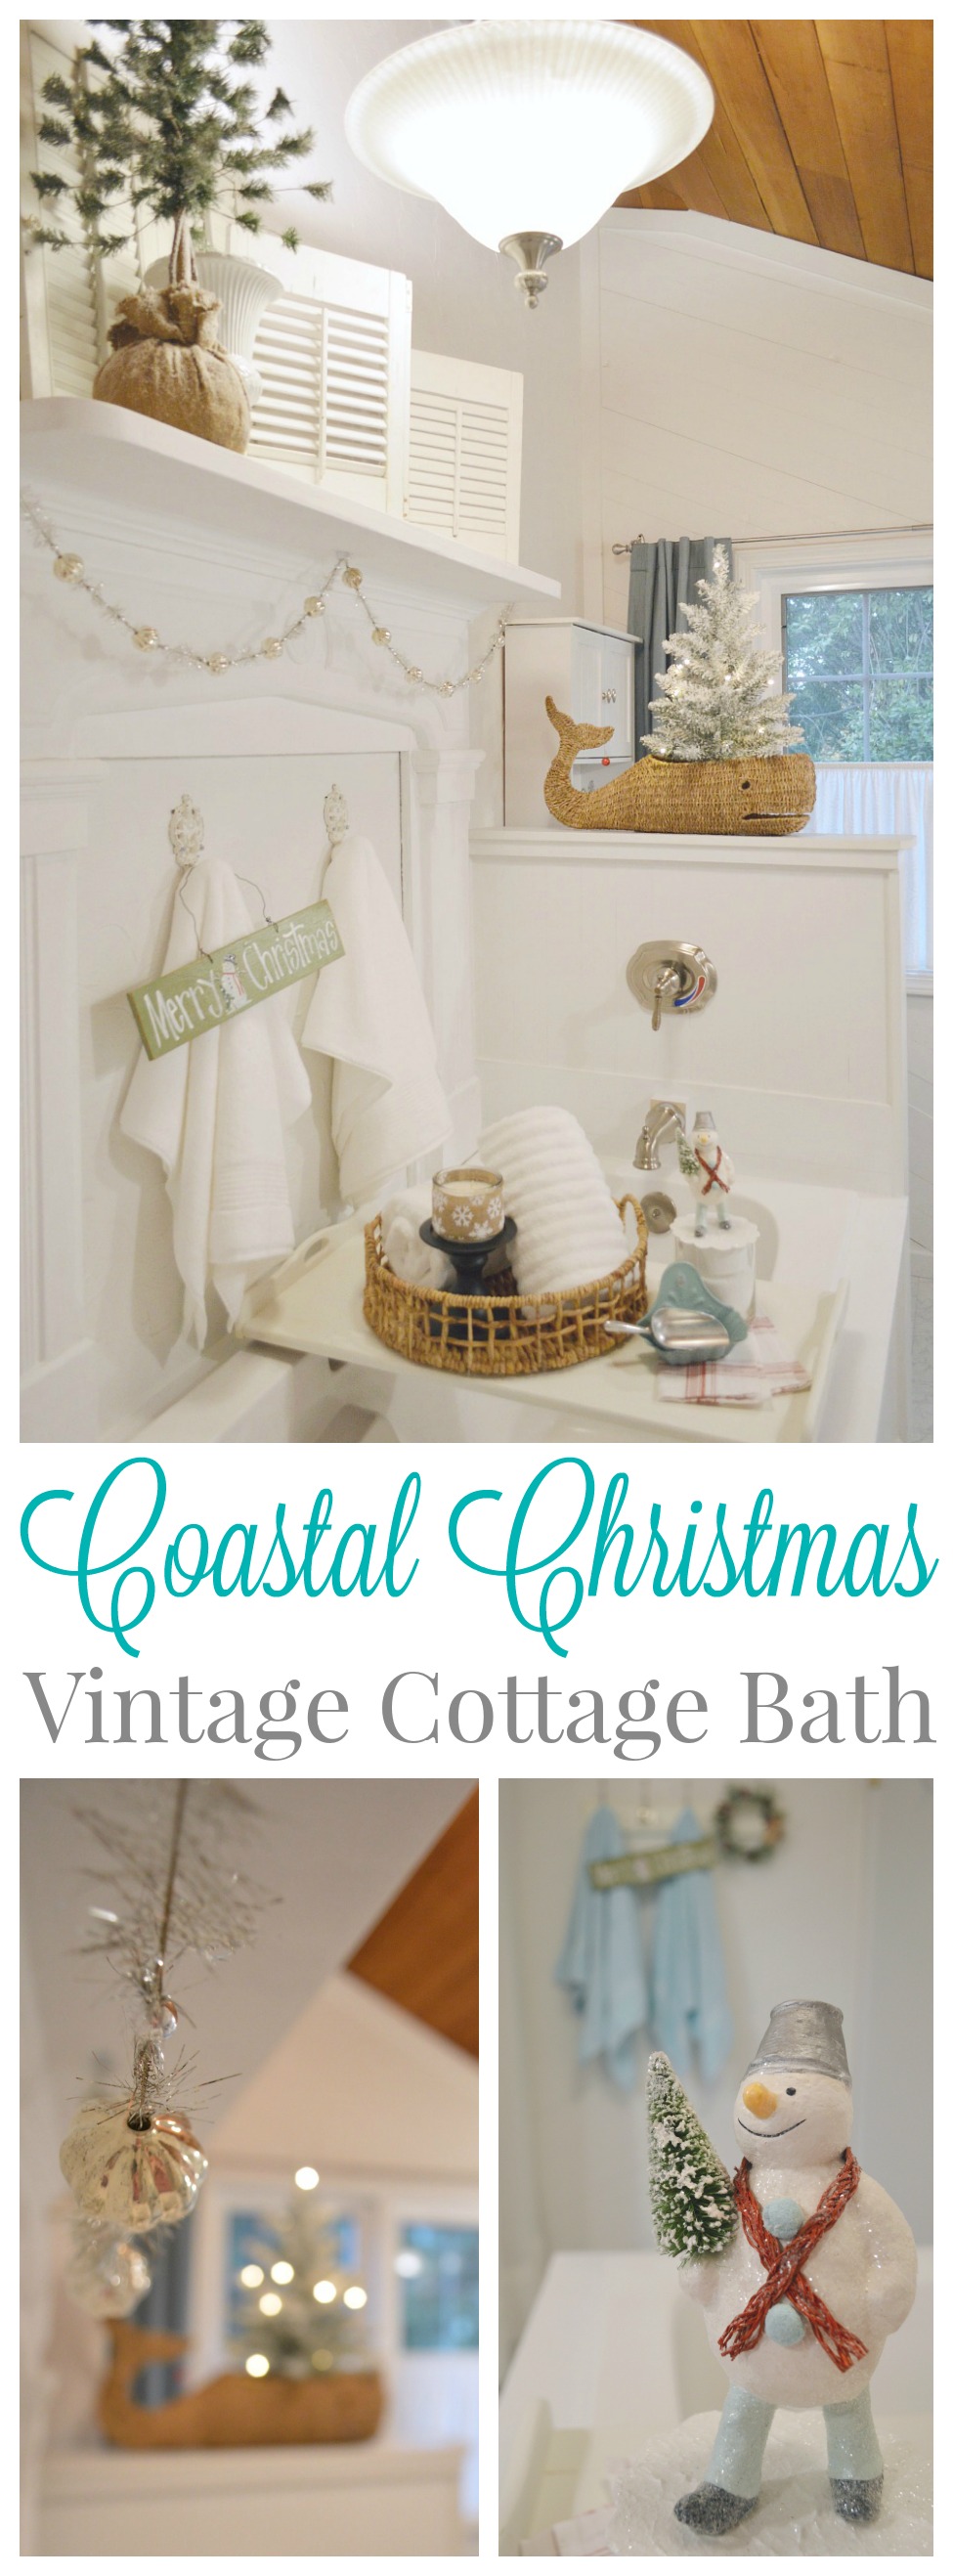 Coatal Christmas 1920's vintage cottage bathroom decorated for the holidays.